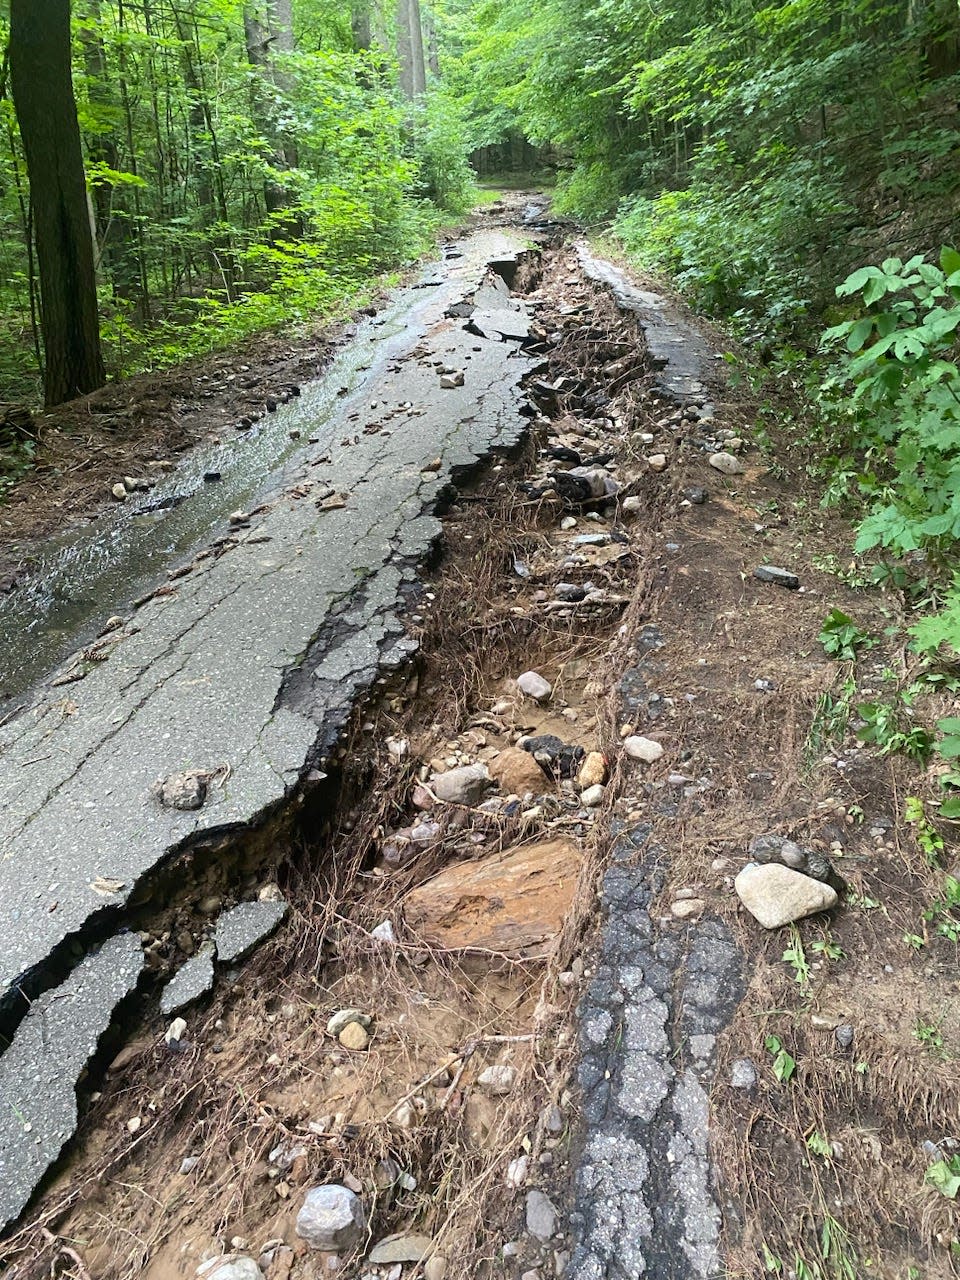 The Chipman Hill section of the TAM sustained major damage in the August 3rd's storm.